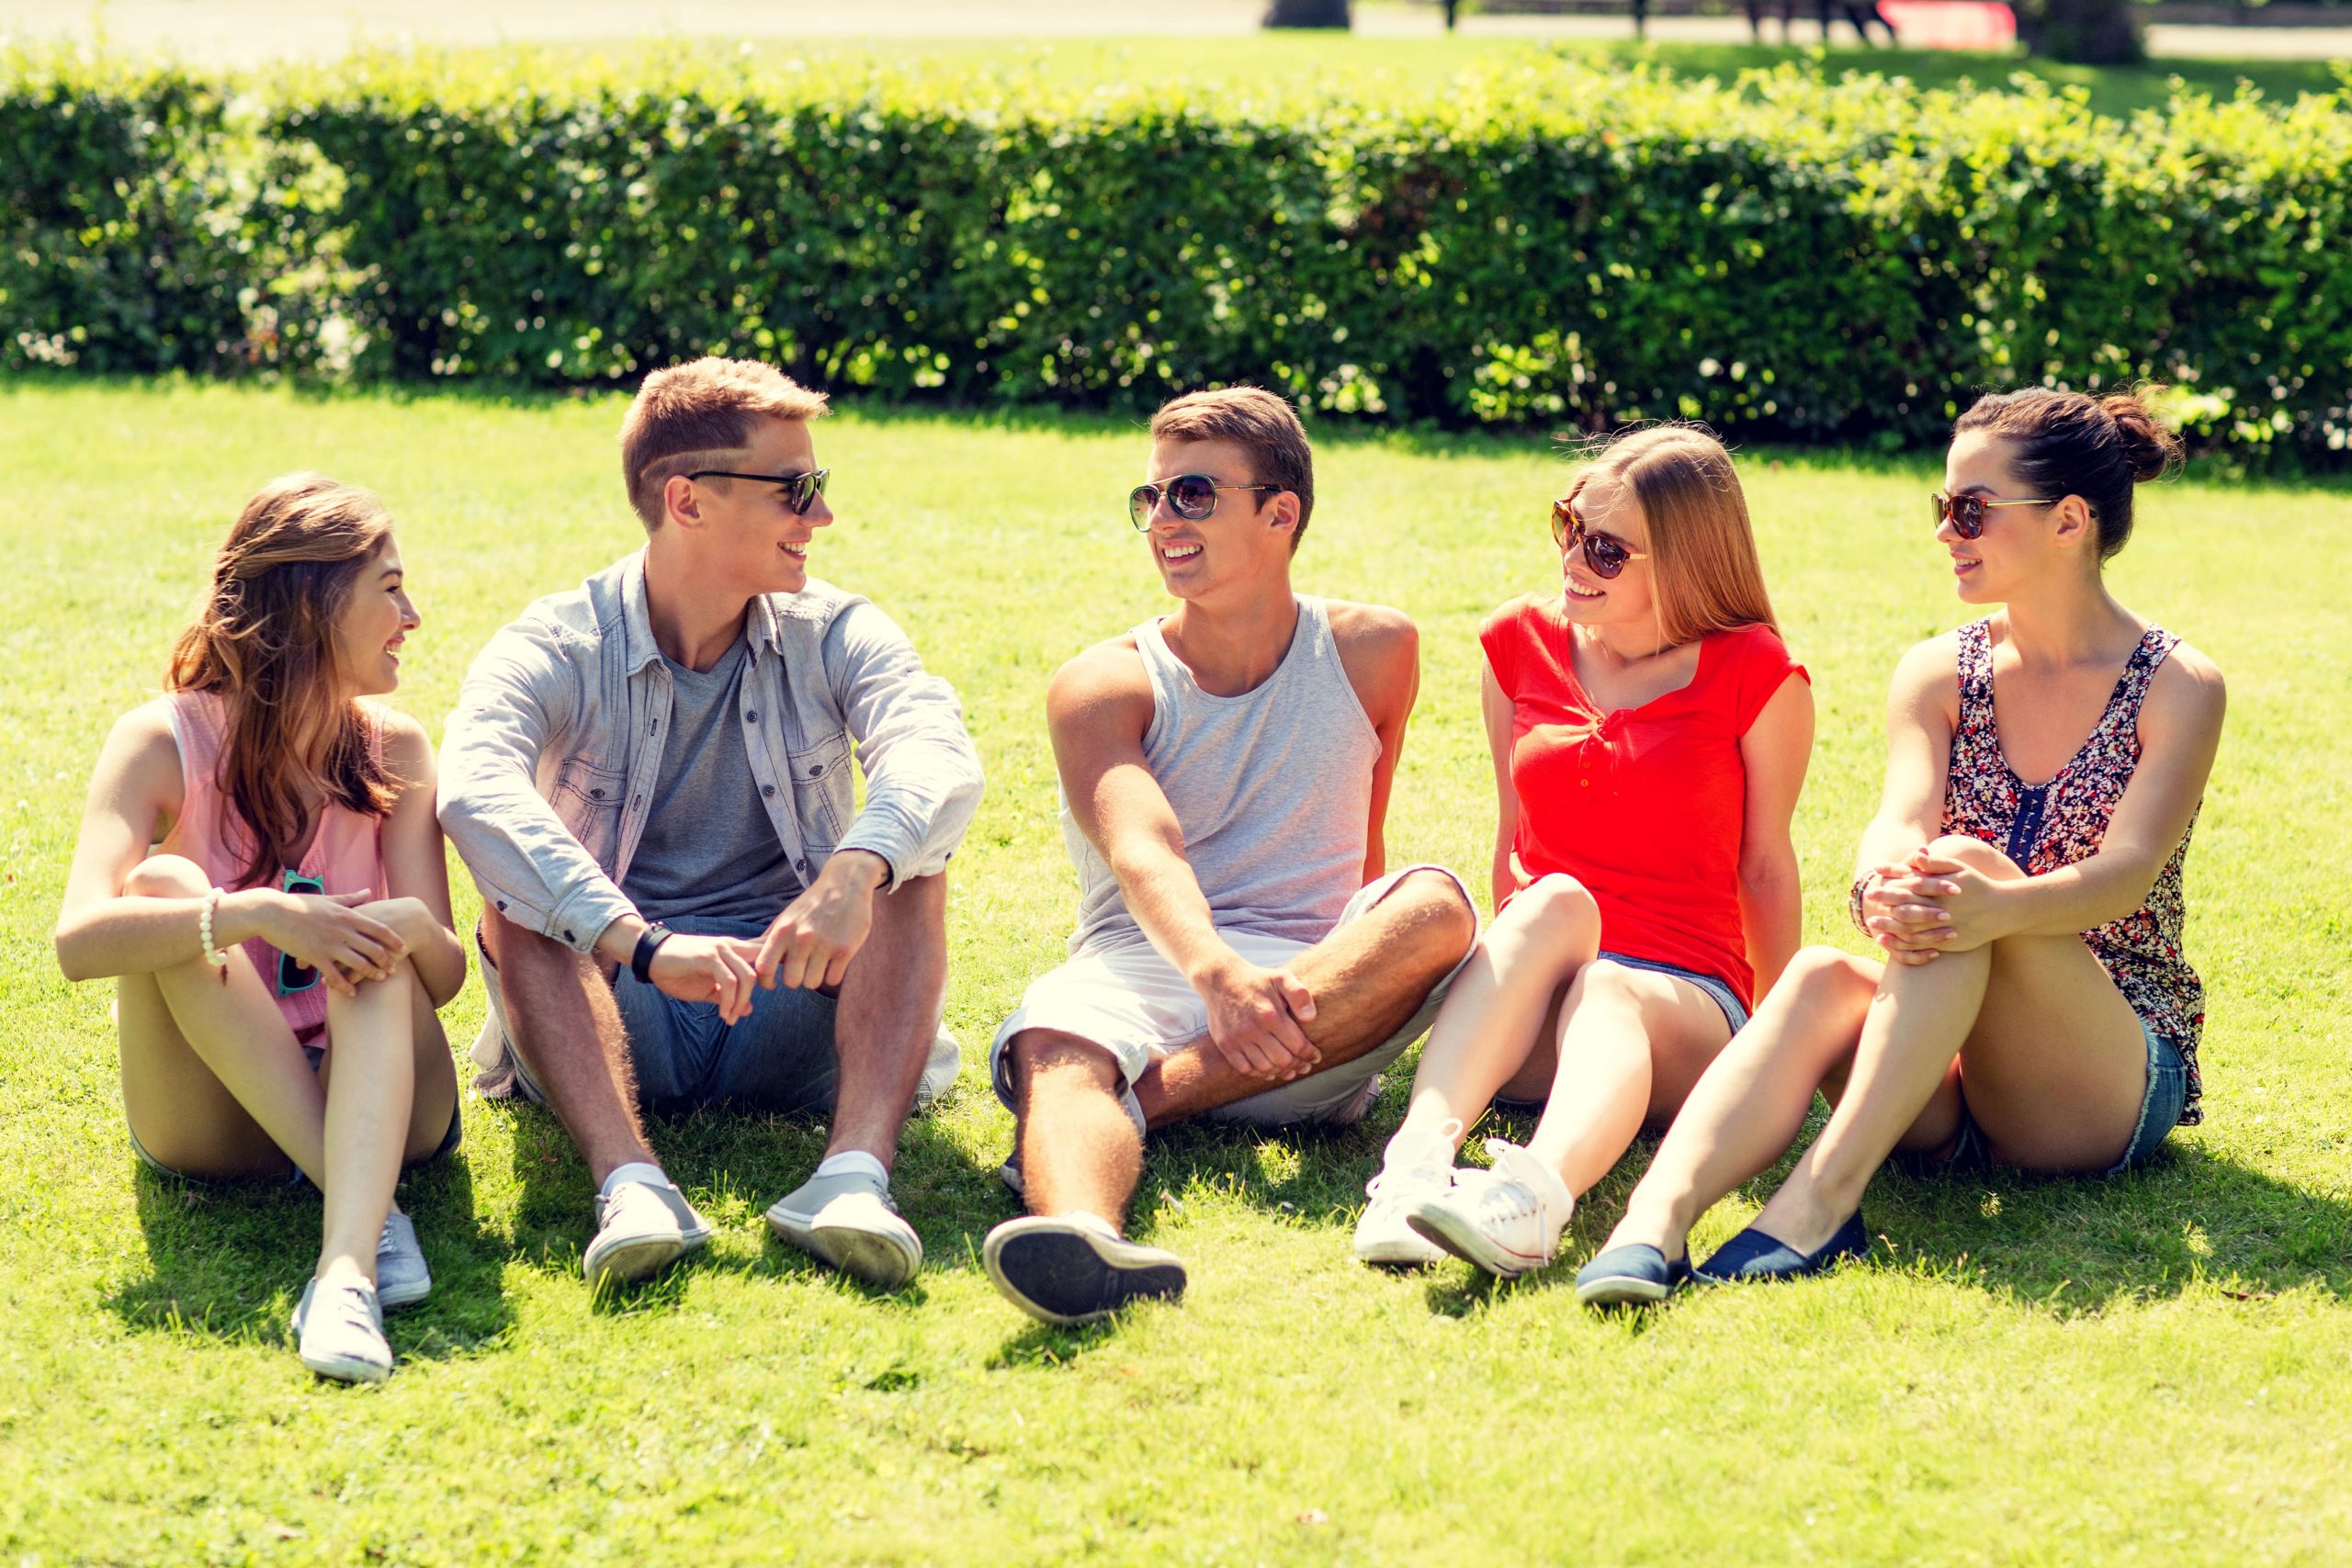 Young people in recovery sitting together on a lawn.